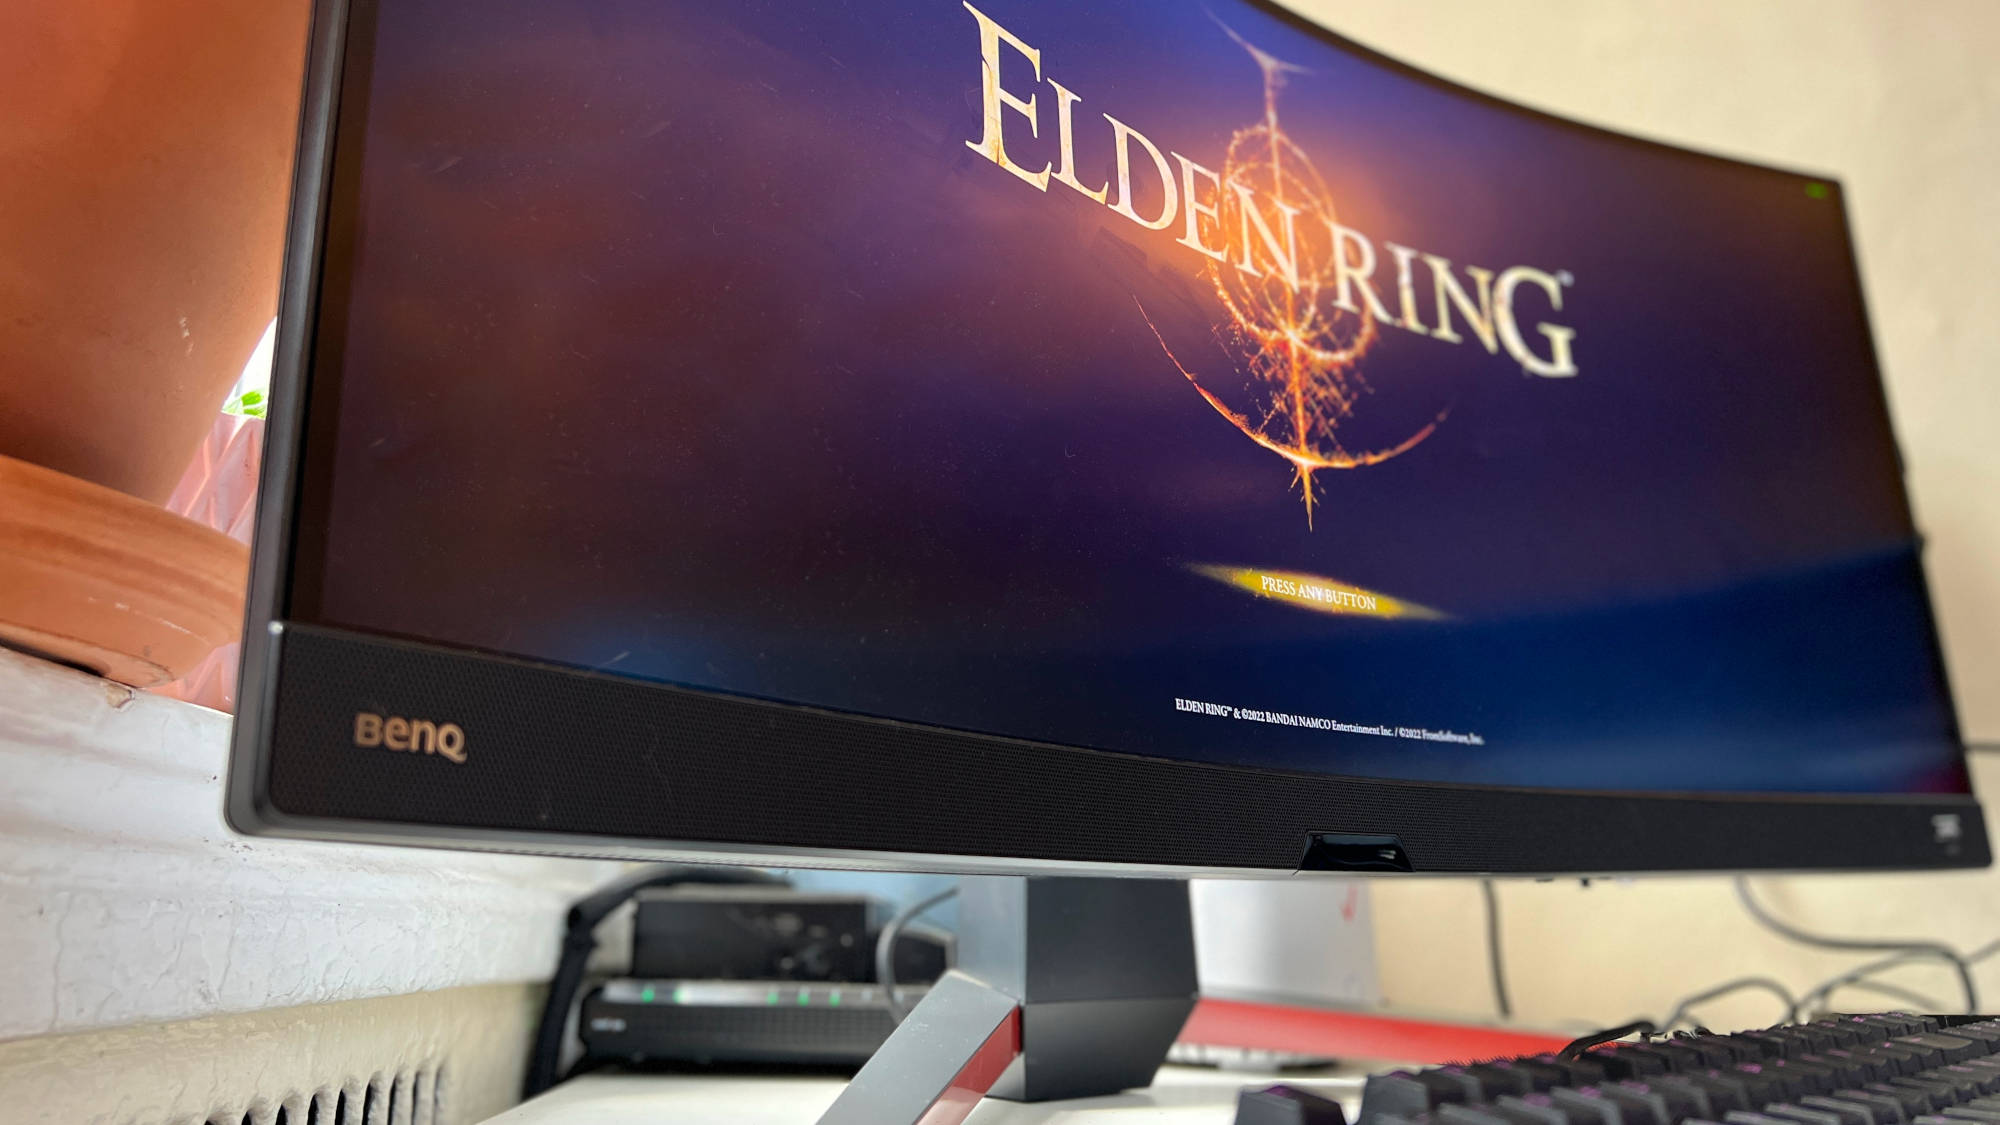 A BenQ Mobiuz EX3410R playing elden ring with the BenQ logo prominently shown